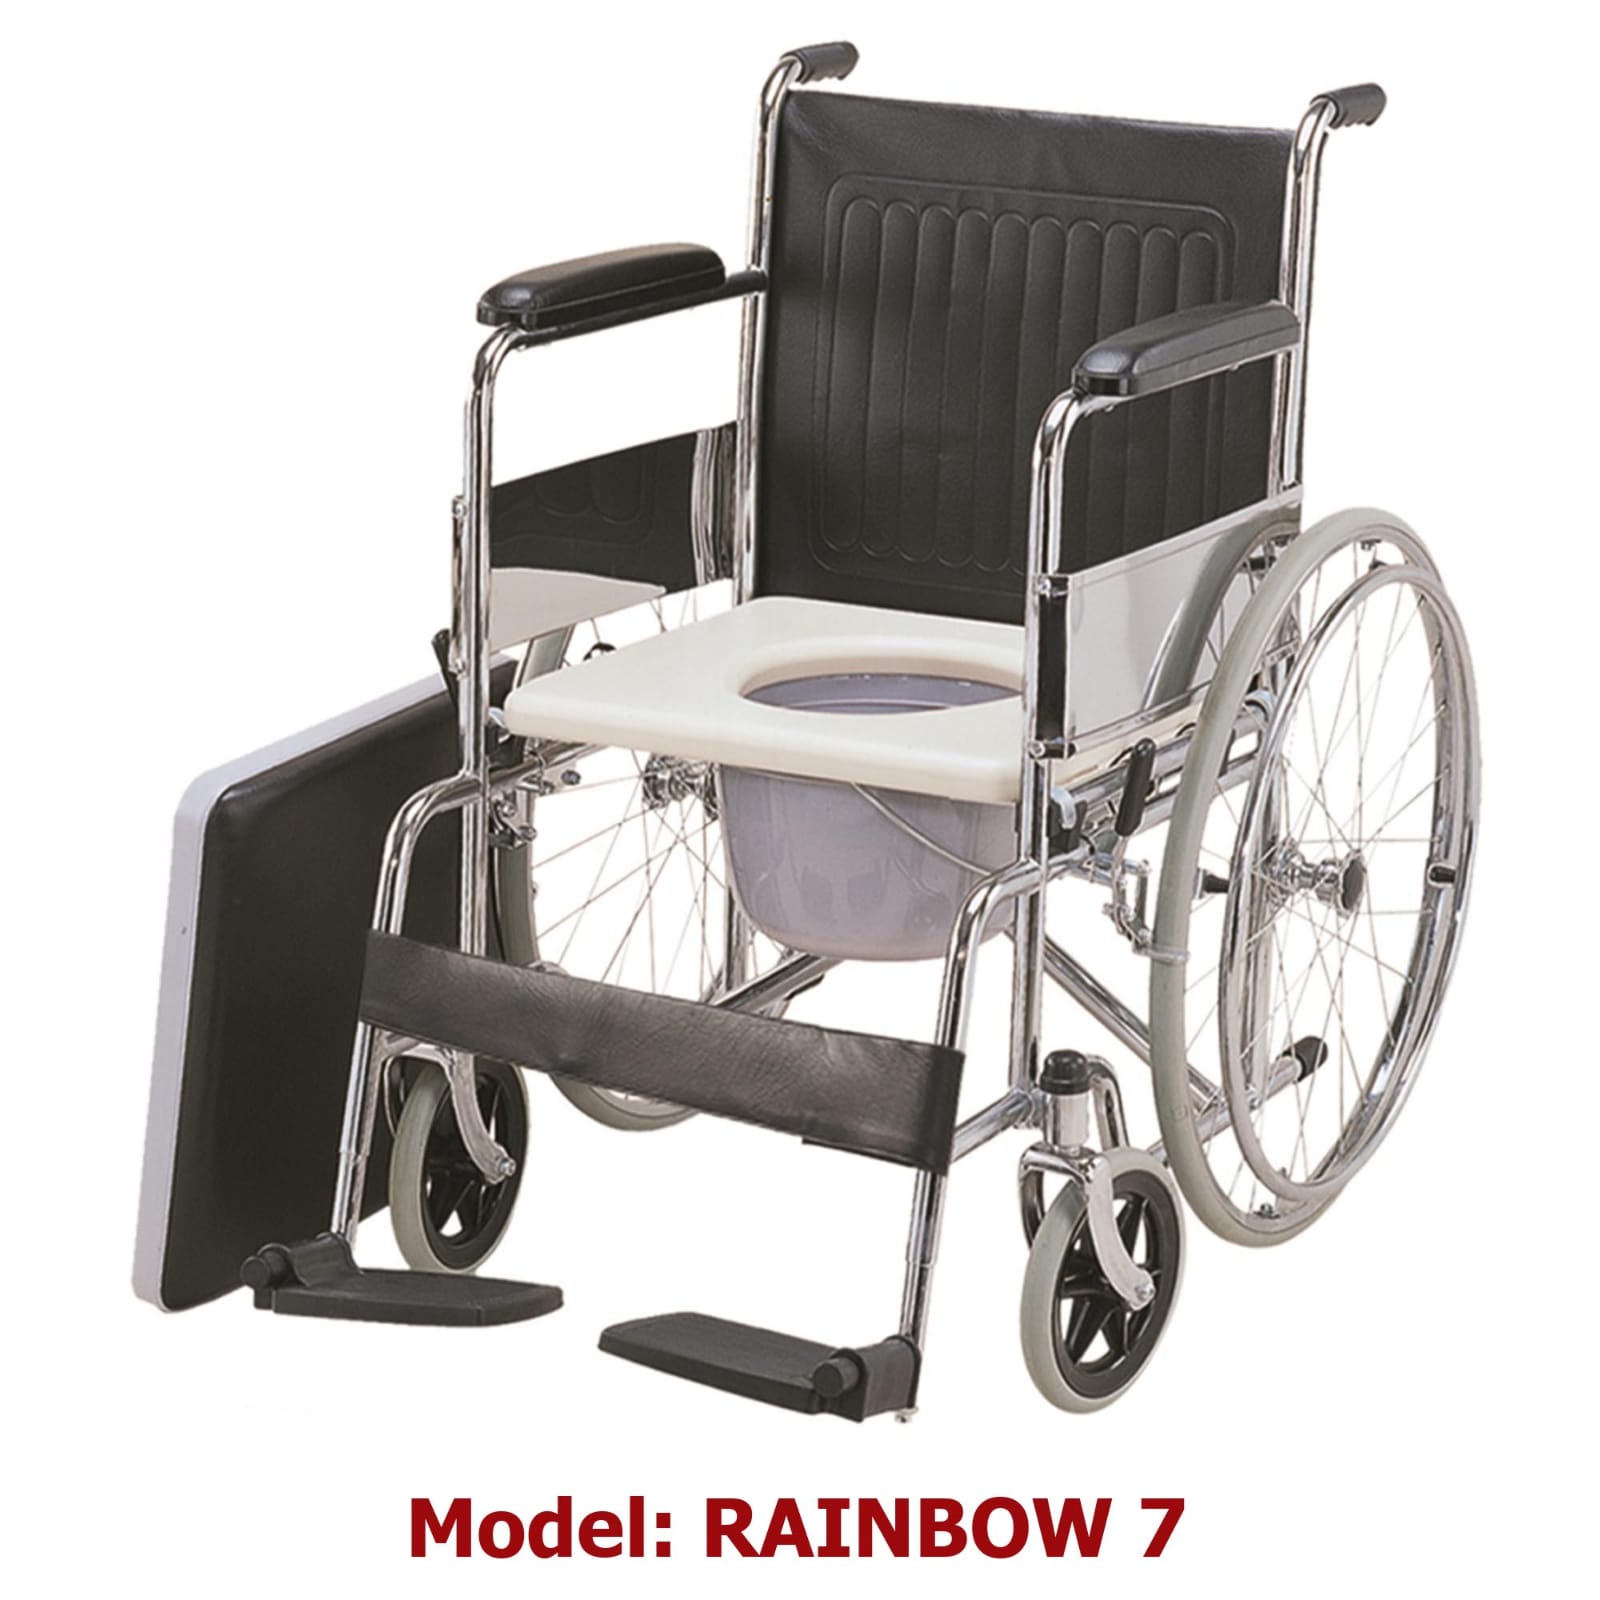 Karma Commode Wheelchair Rainbow 7 On Sale Suppliers, Service Provider in Dilli haat